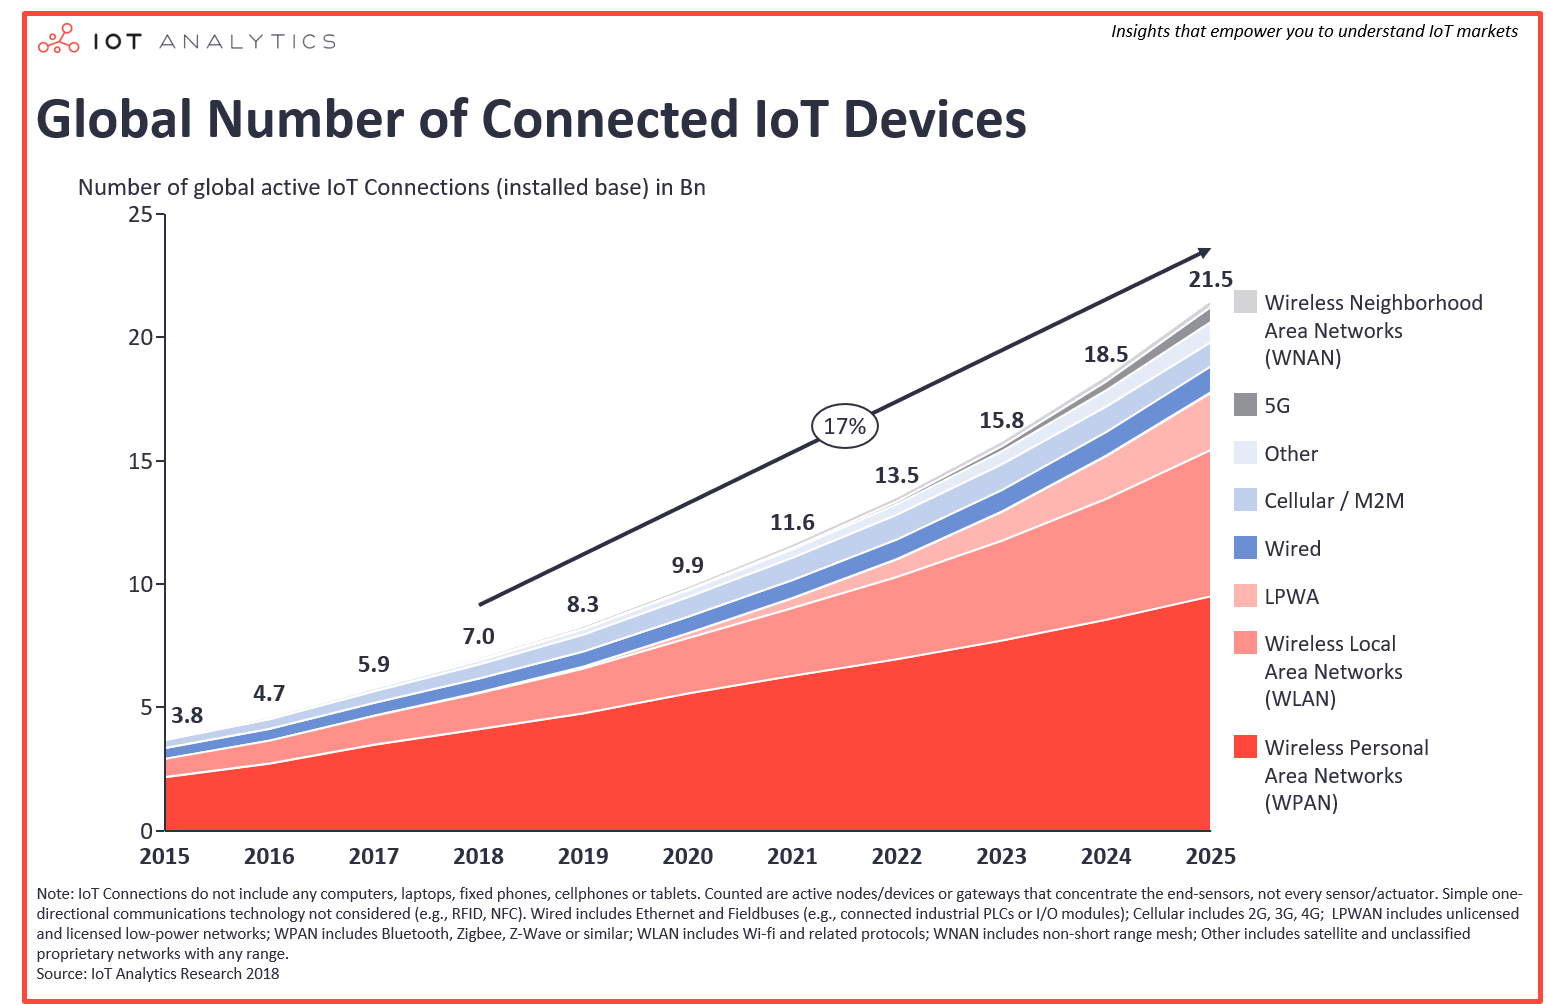 Number-of-IoT-devices-worldwide-2015-2025-Aug-2018-min.png